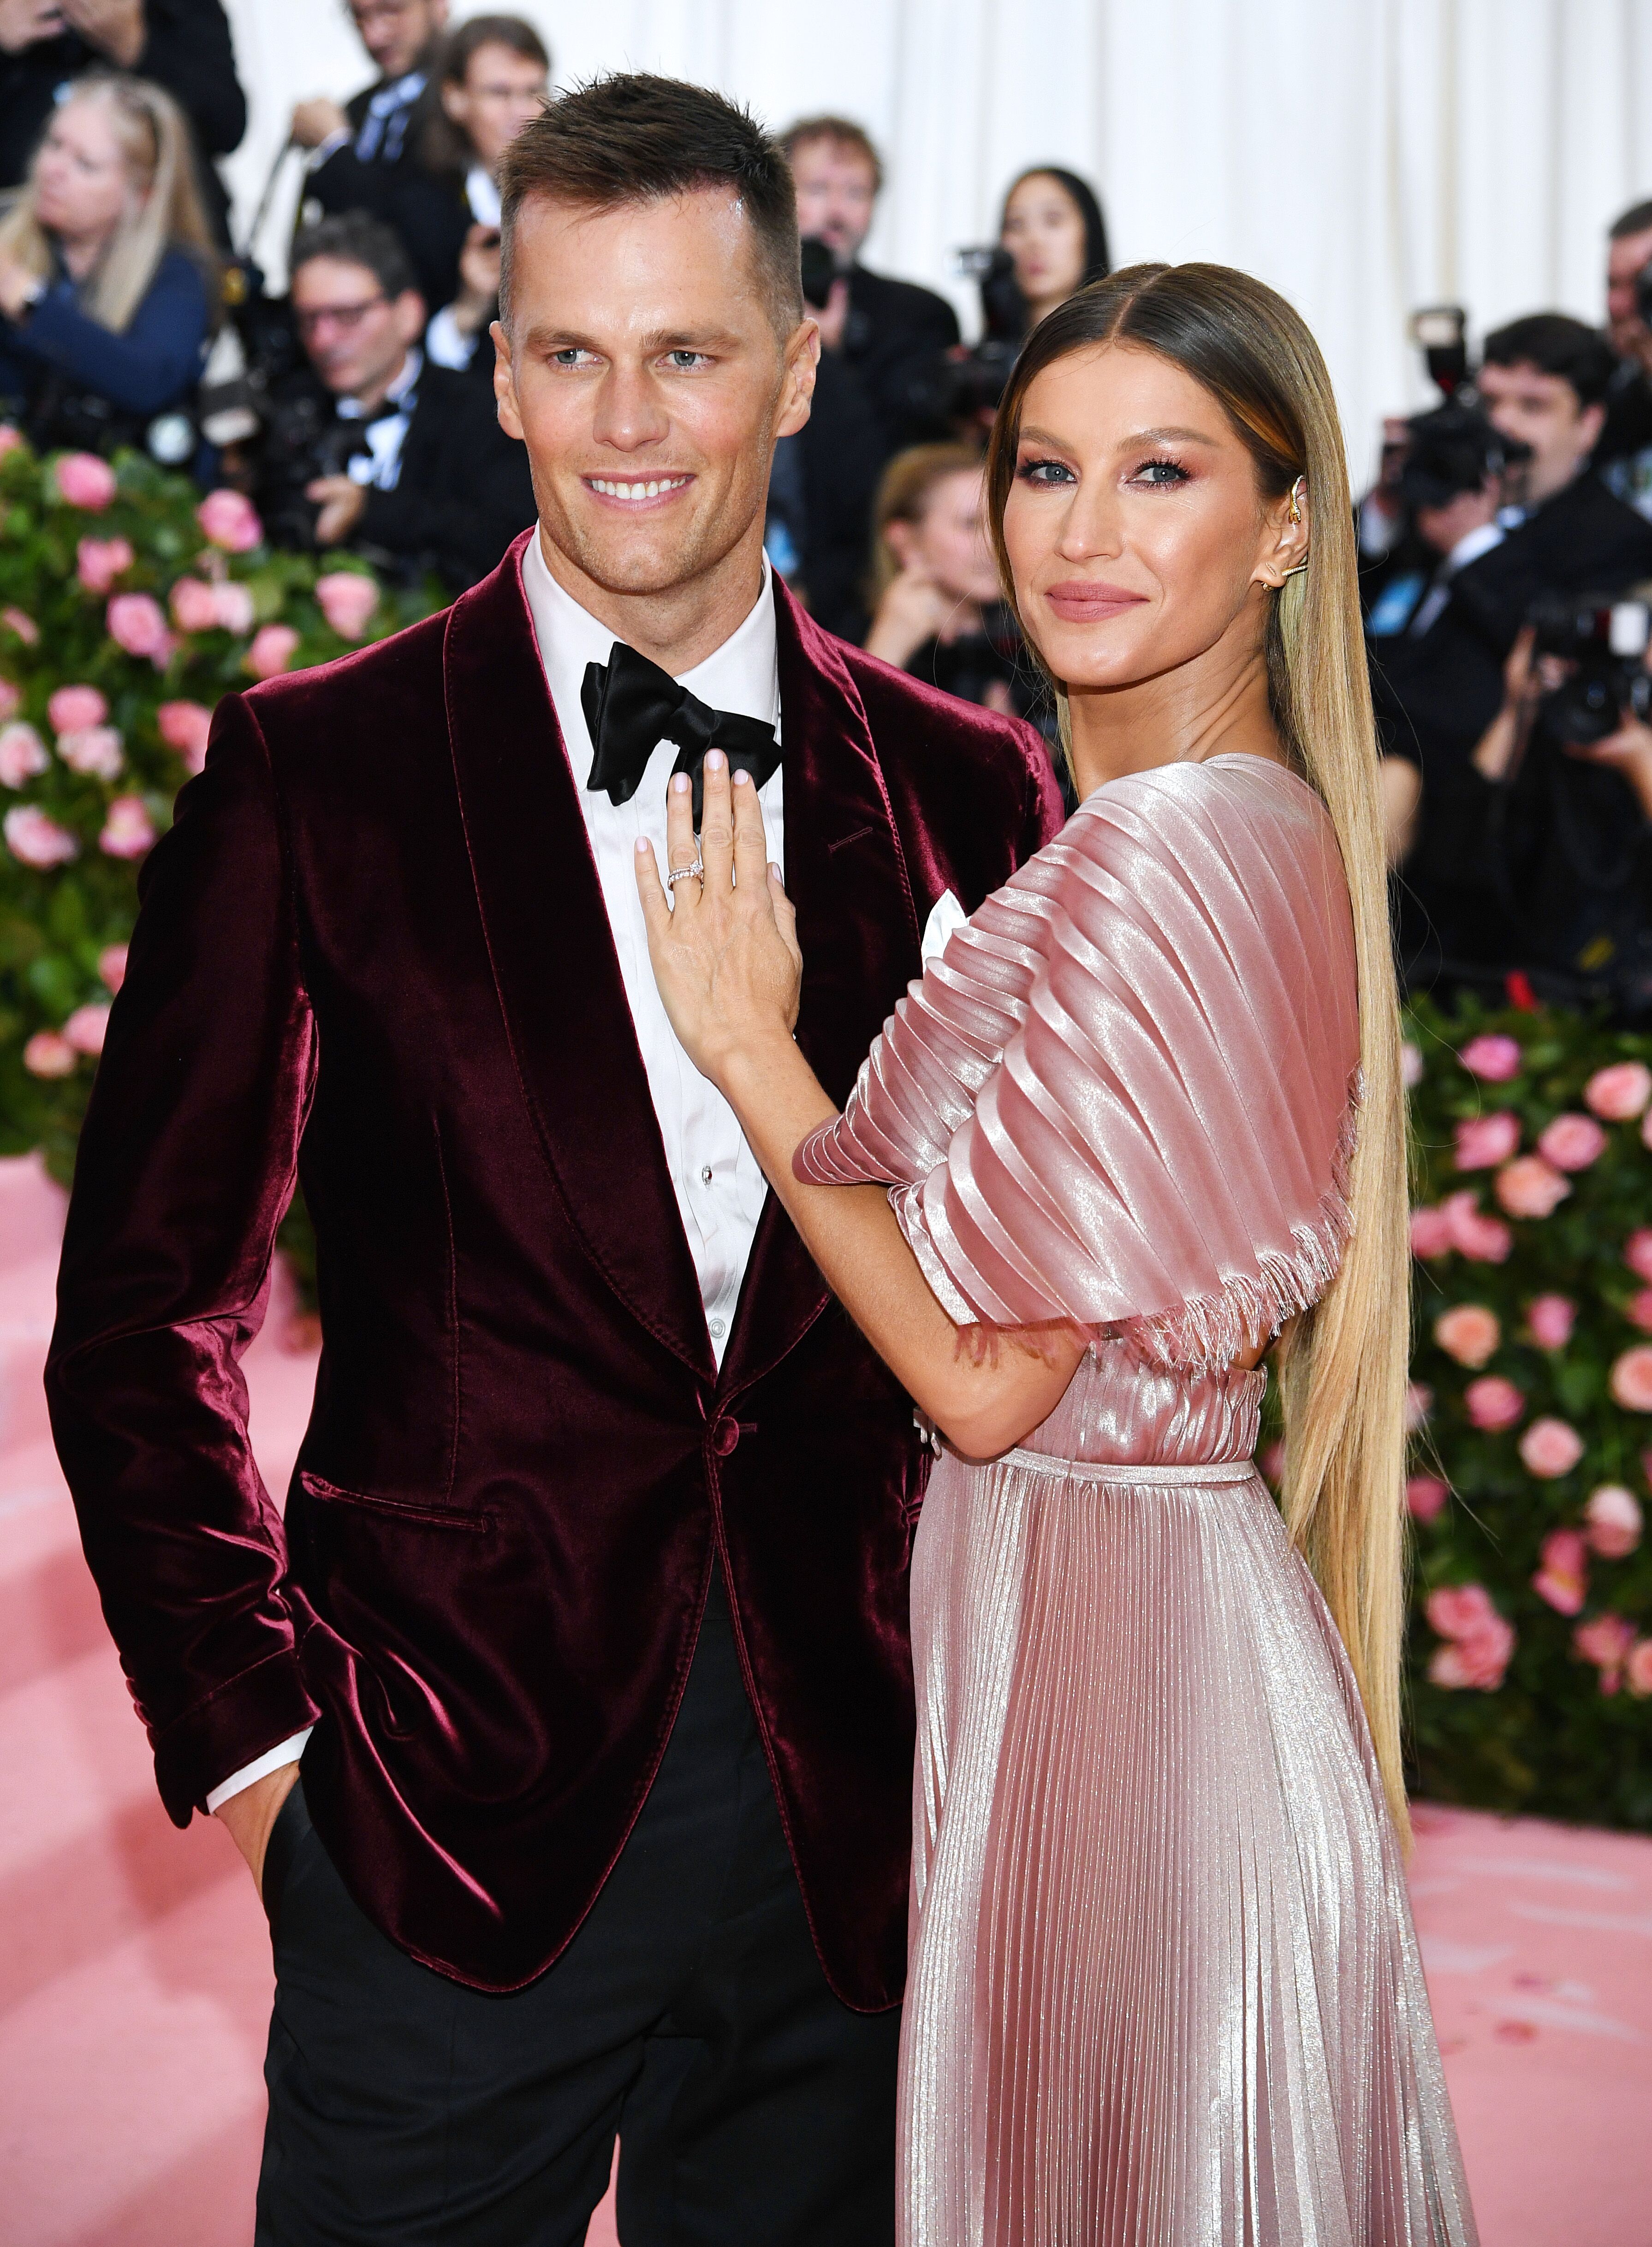 Gisele Bündchen attends The 2019 Met Gala. | Source: Getty Images